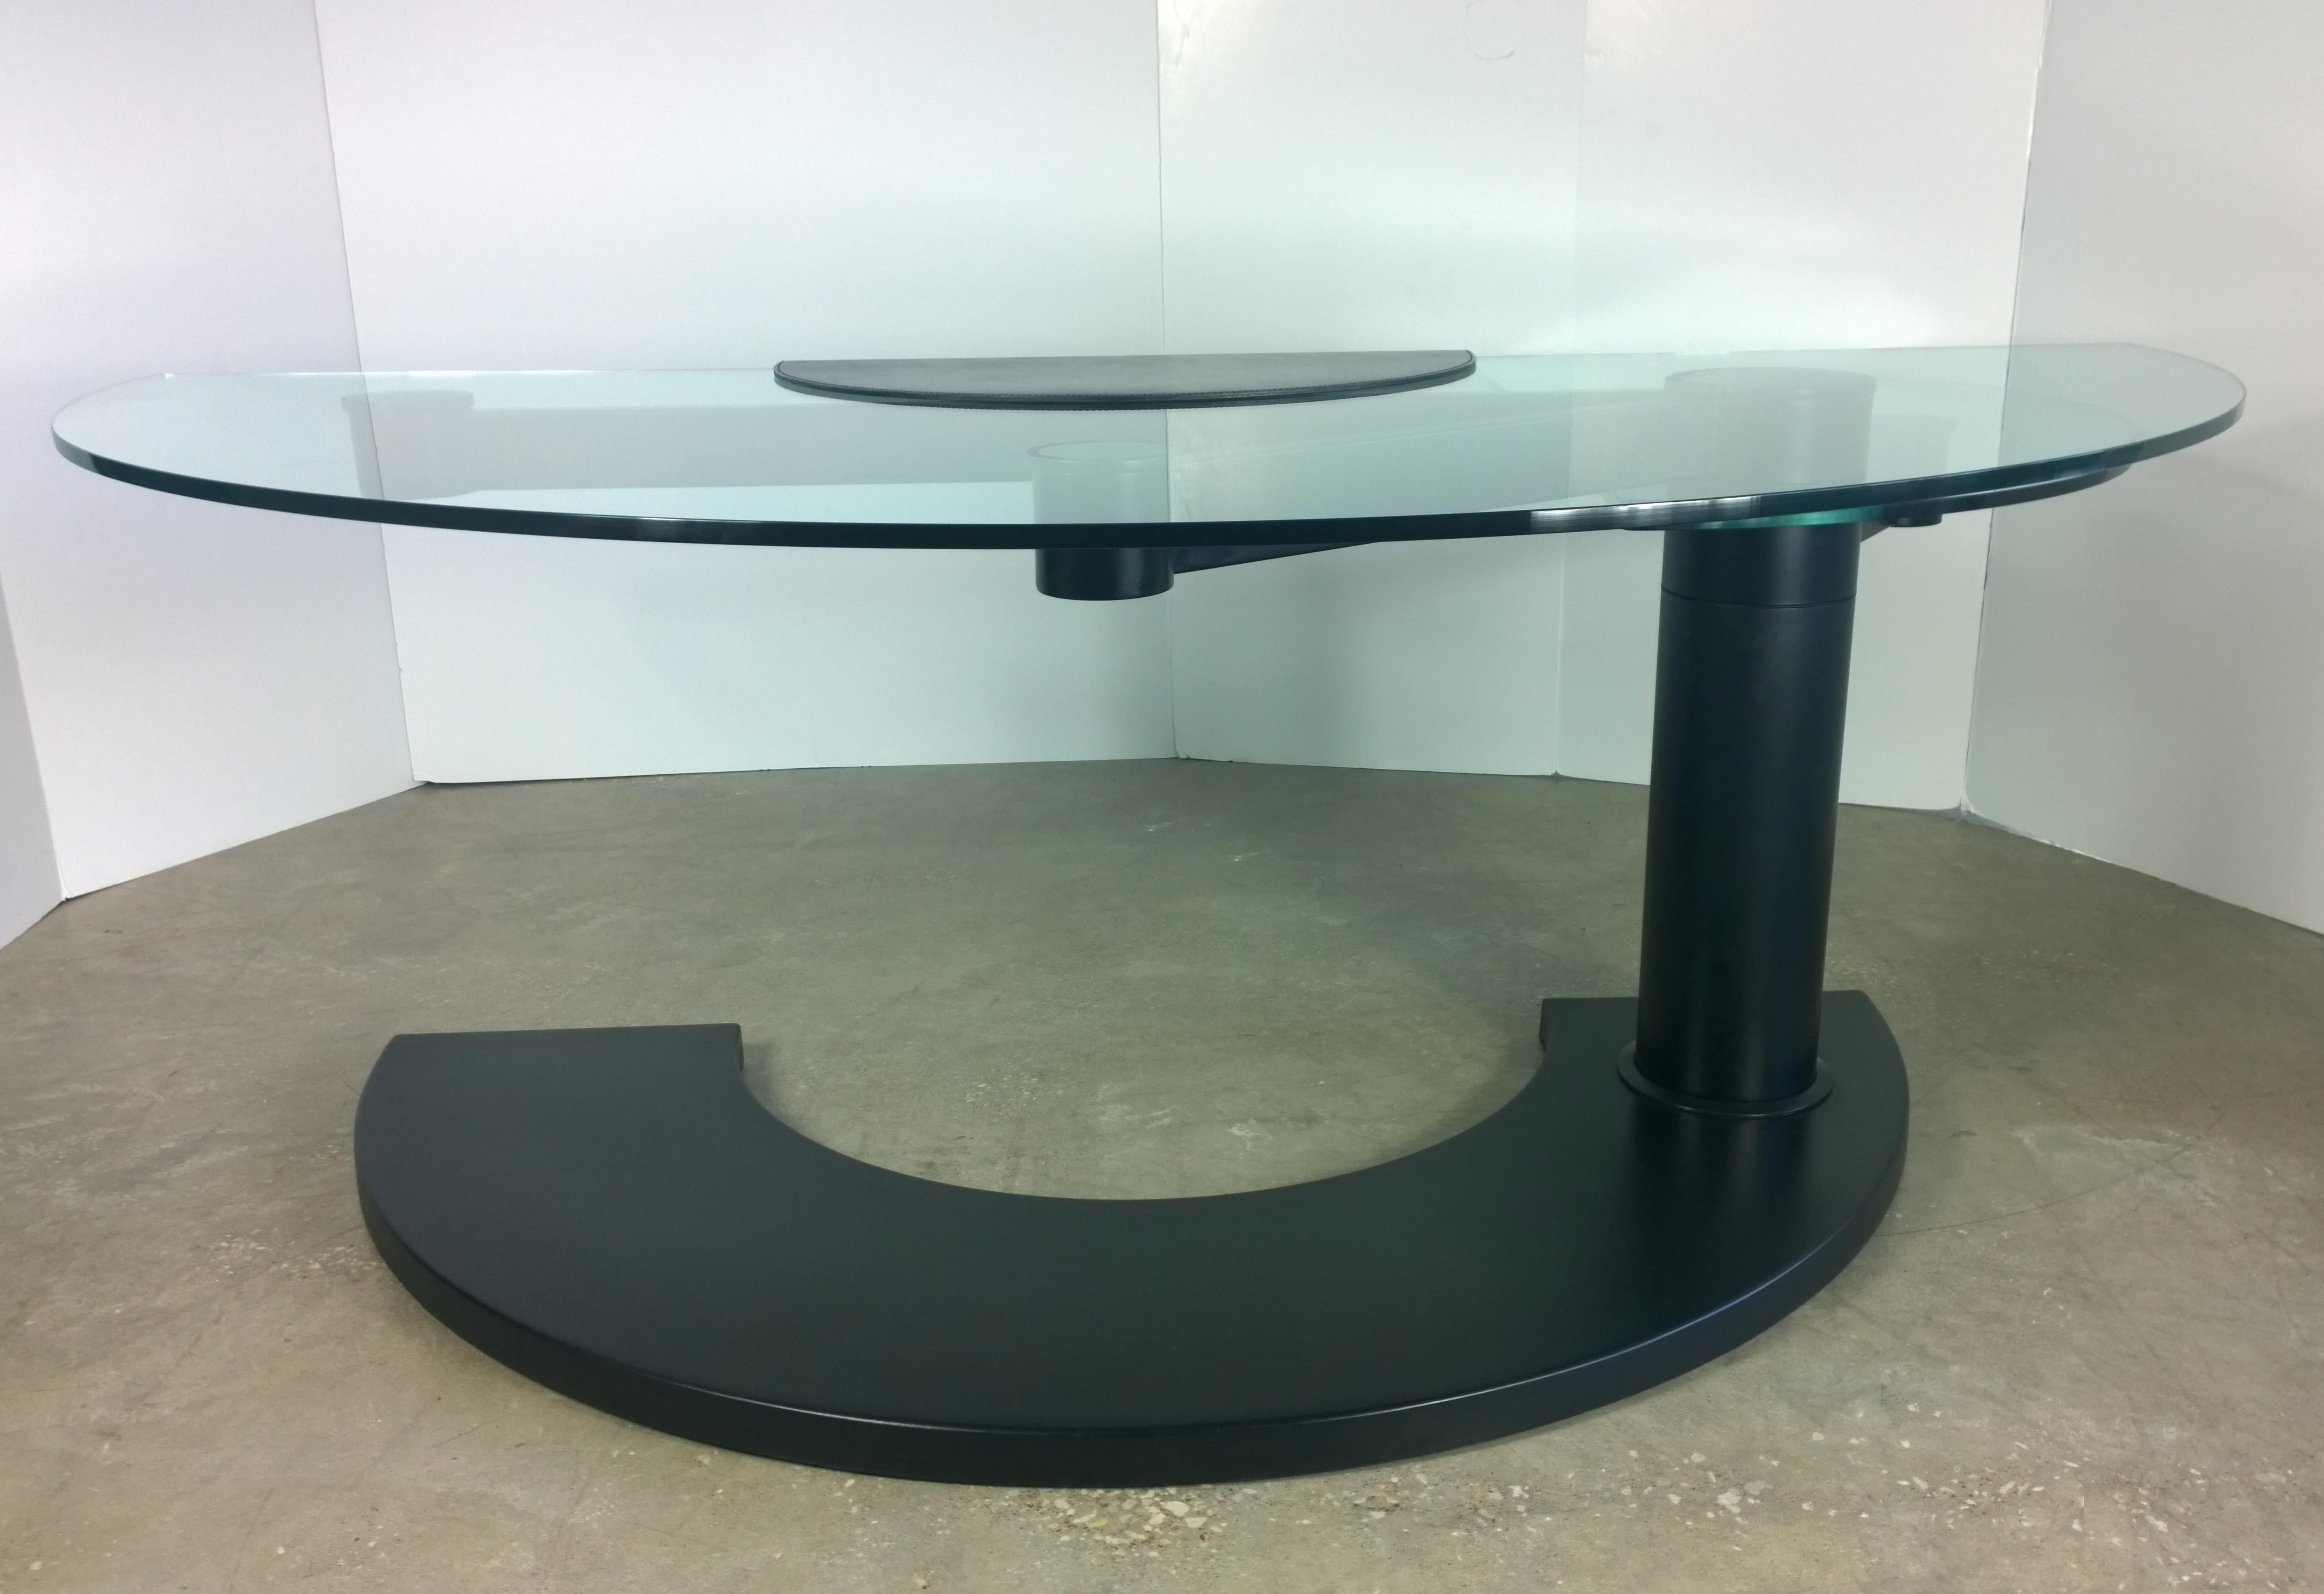 Offered is a very rare two-part glass top with black rubber over metal demilune base Arkitera desk 450 by Pierfranco Bagarotti for Pace. This quite rare Pace desk has a demilune shaped glass surface for the desktop and a second demilune shaped glass